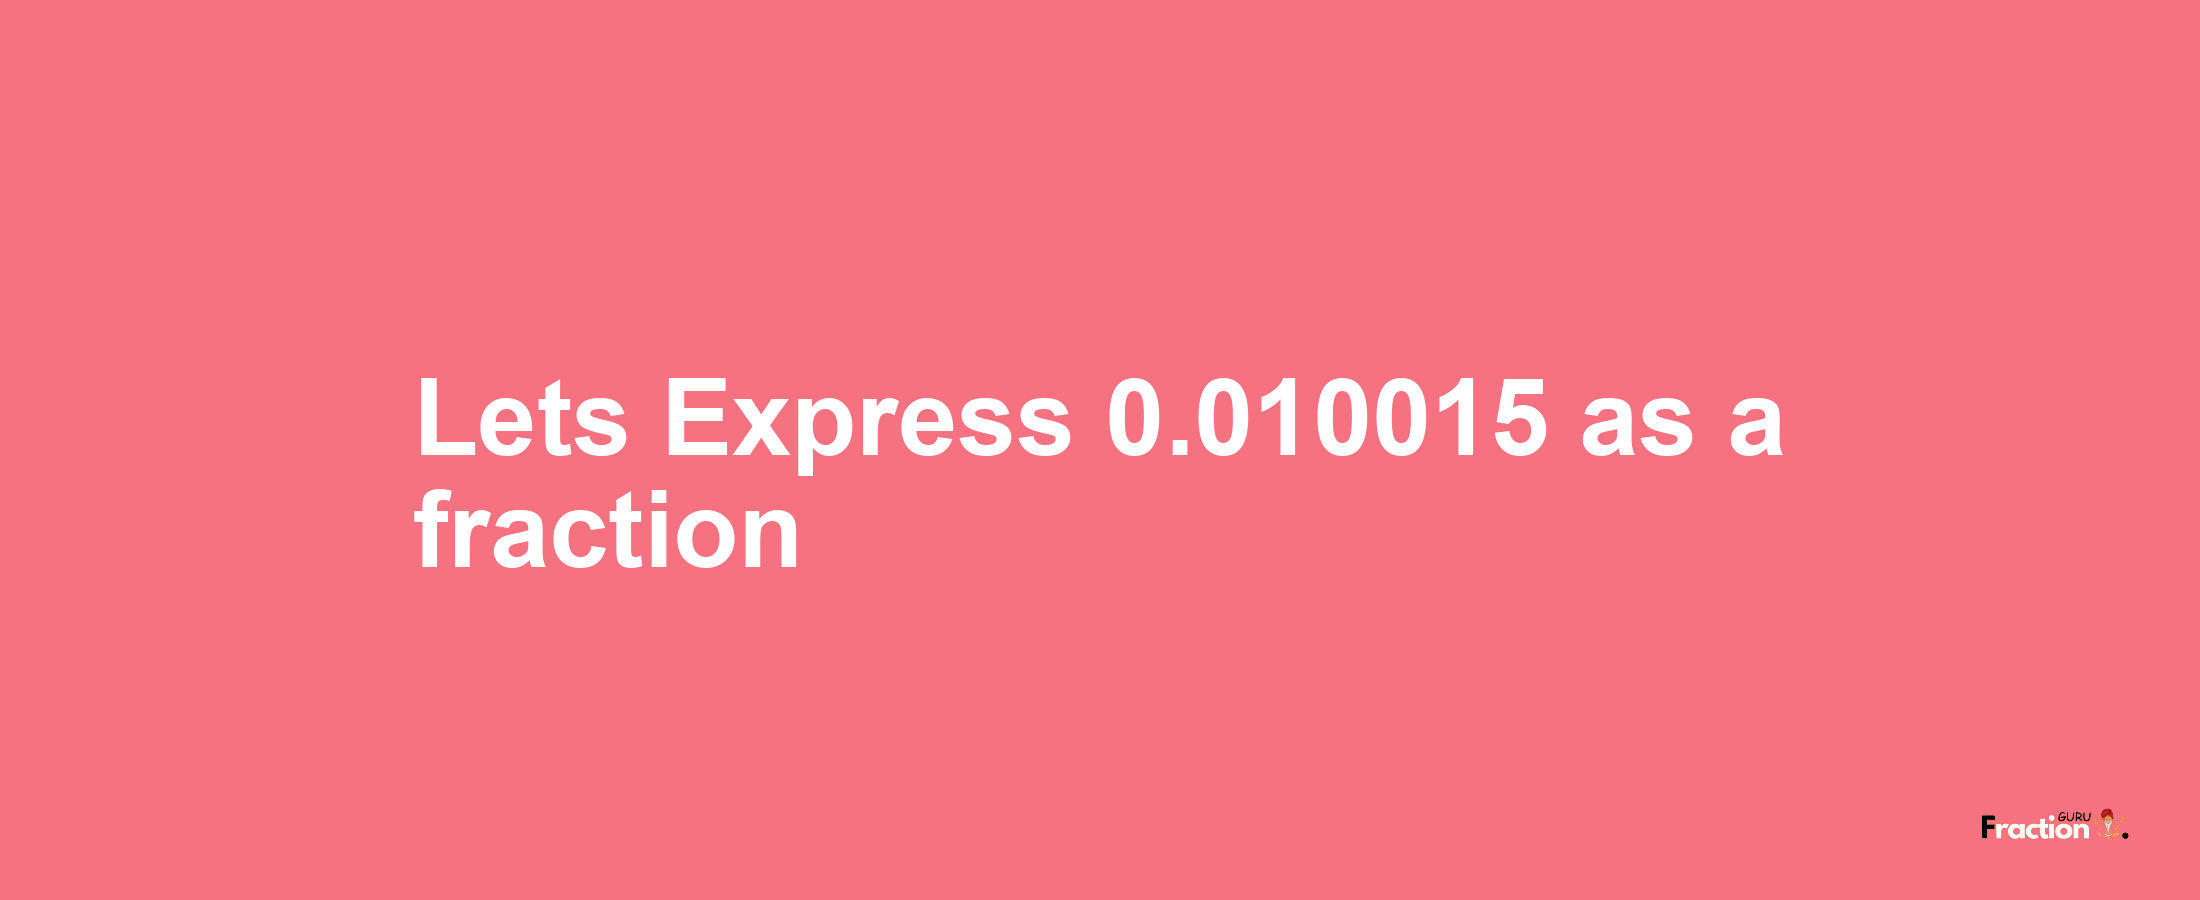 Lets Express 0.010015 as afraction